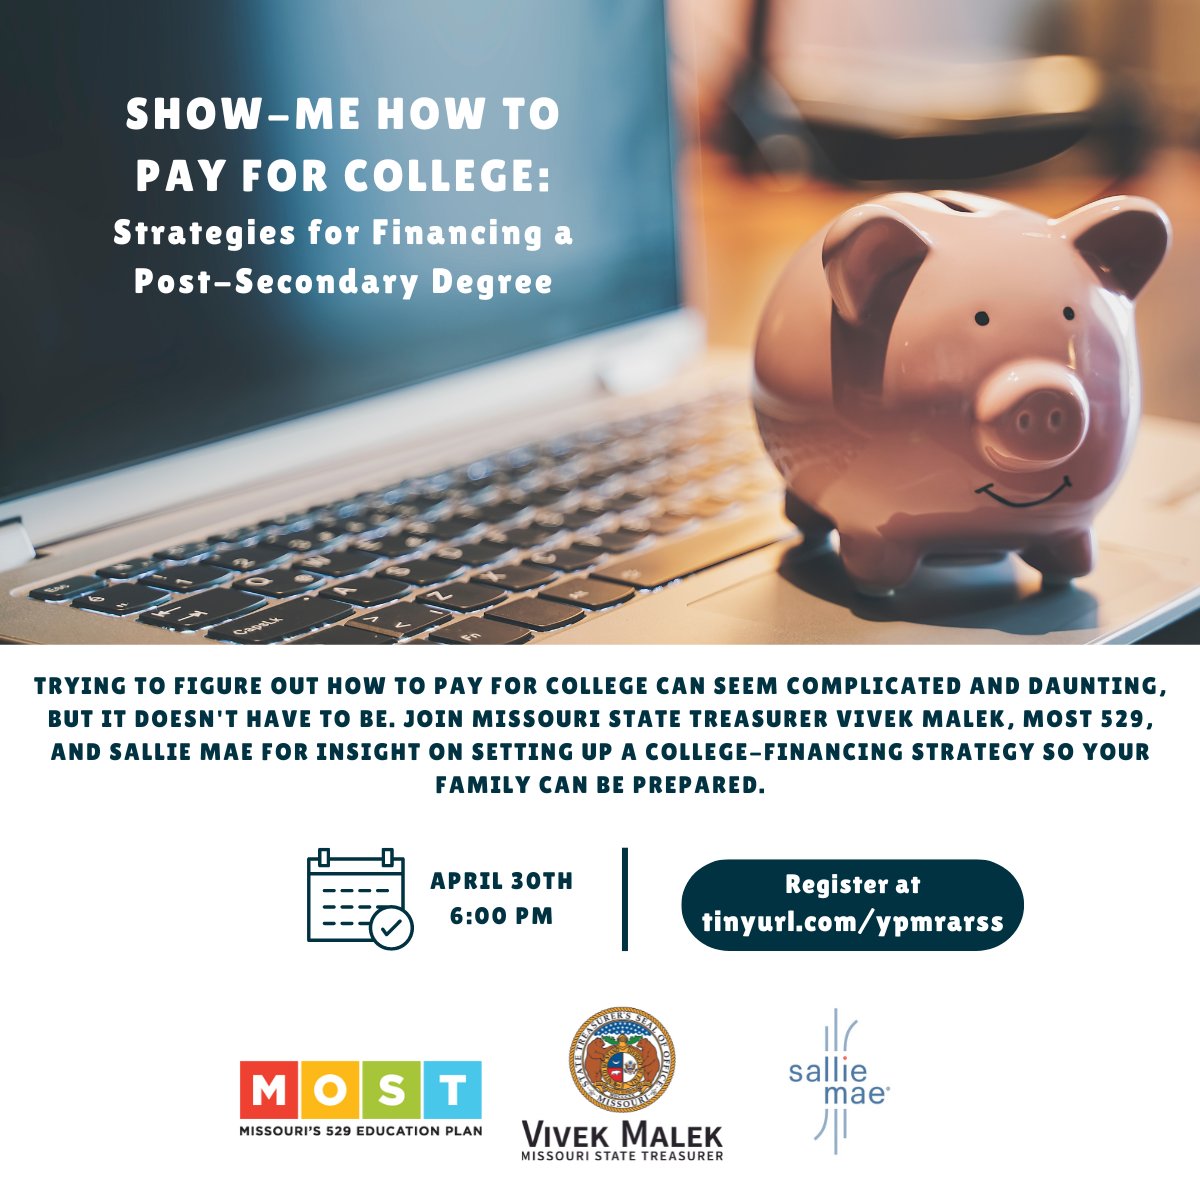 HAPPENING TODAY--> Show-Me How to Pay for College: Strategies for Financing a Post-Secondary Degree To learn more about savings, resources, and scholarships, please join us for this free LIVE webinar. After the presentation attendees will have the opportunity to ask questions…